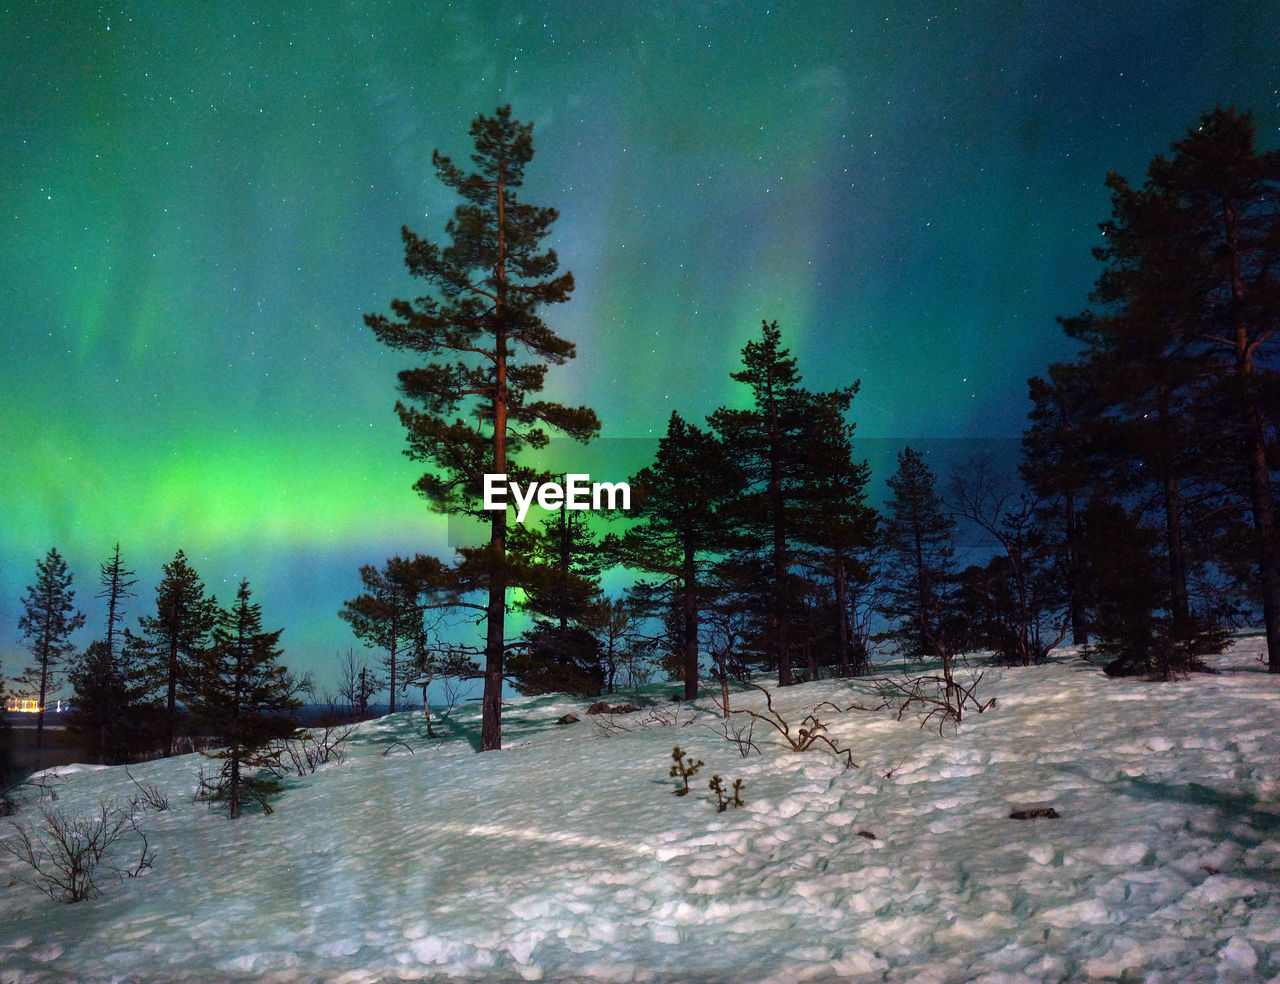 Trees on snow covered field against aurora borealis in sky